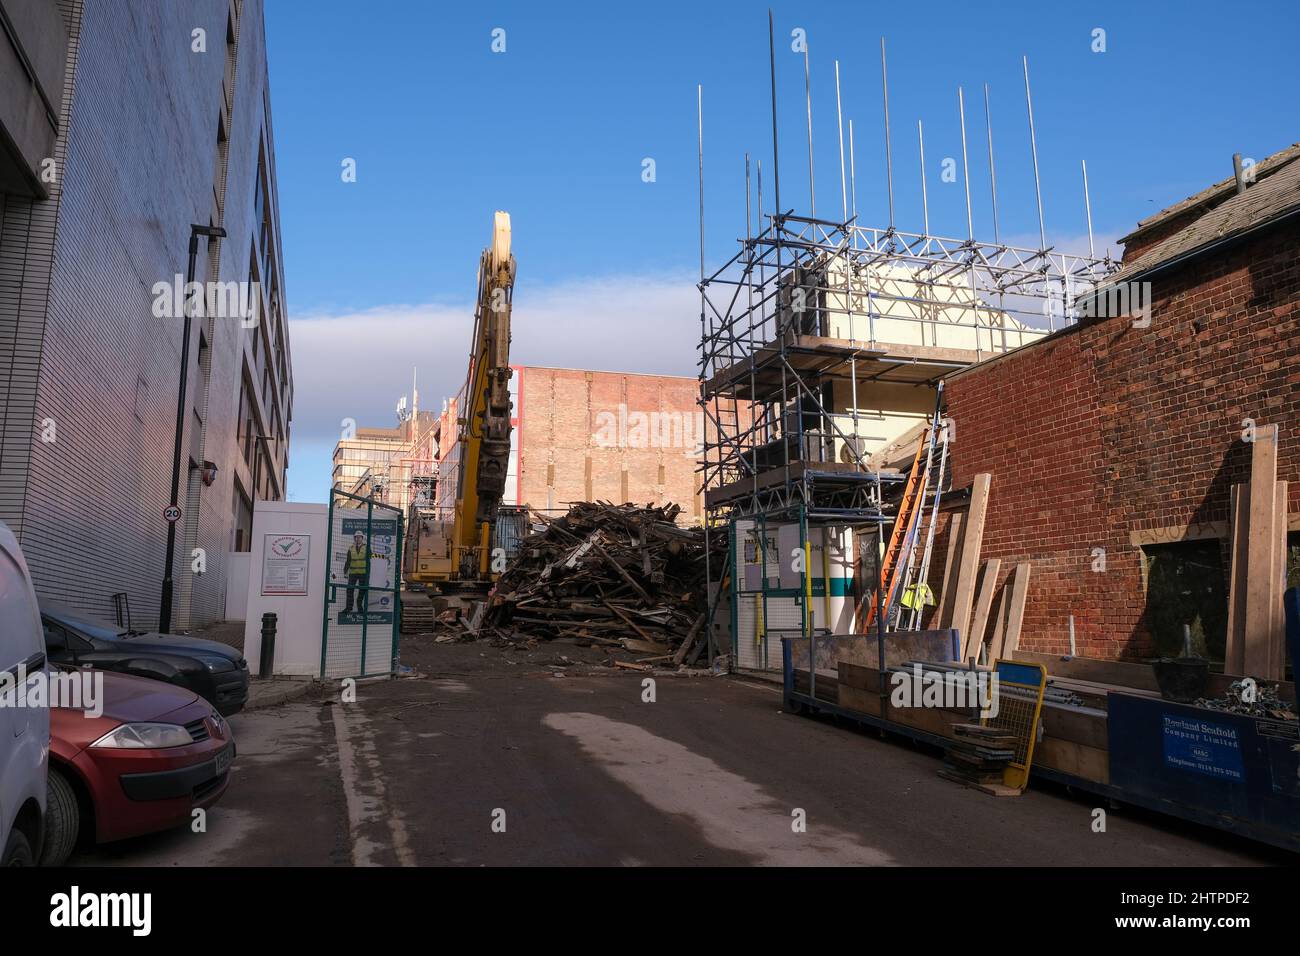 The Yorkshireman pub on Burgess Street in Sheffield being demolished to make way for new developments Stock Photo